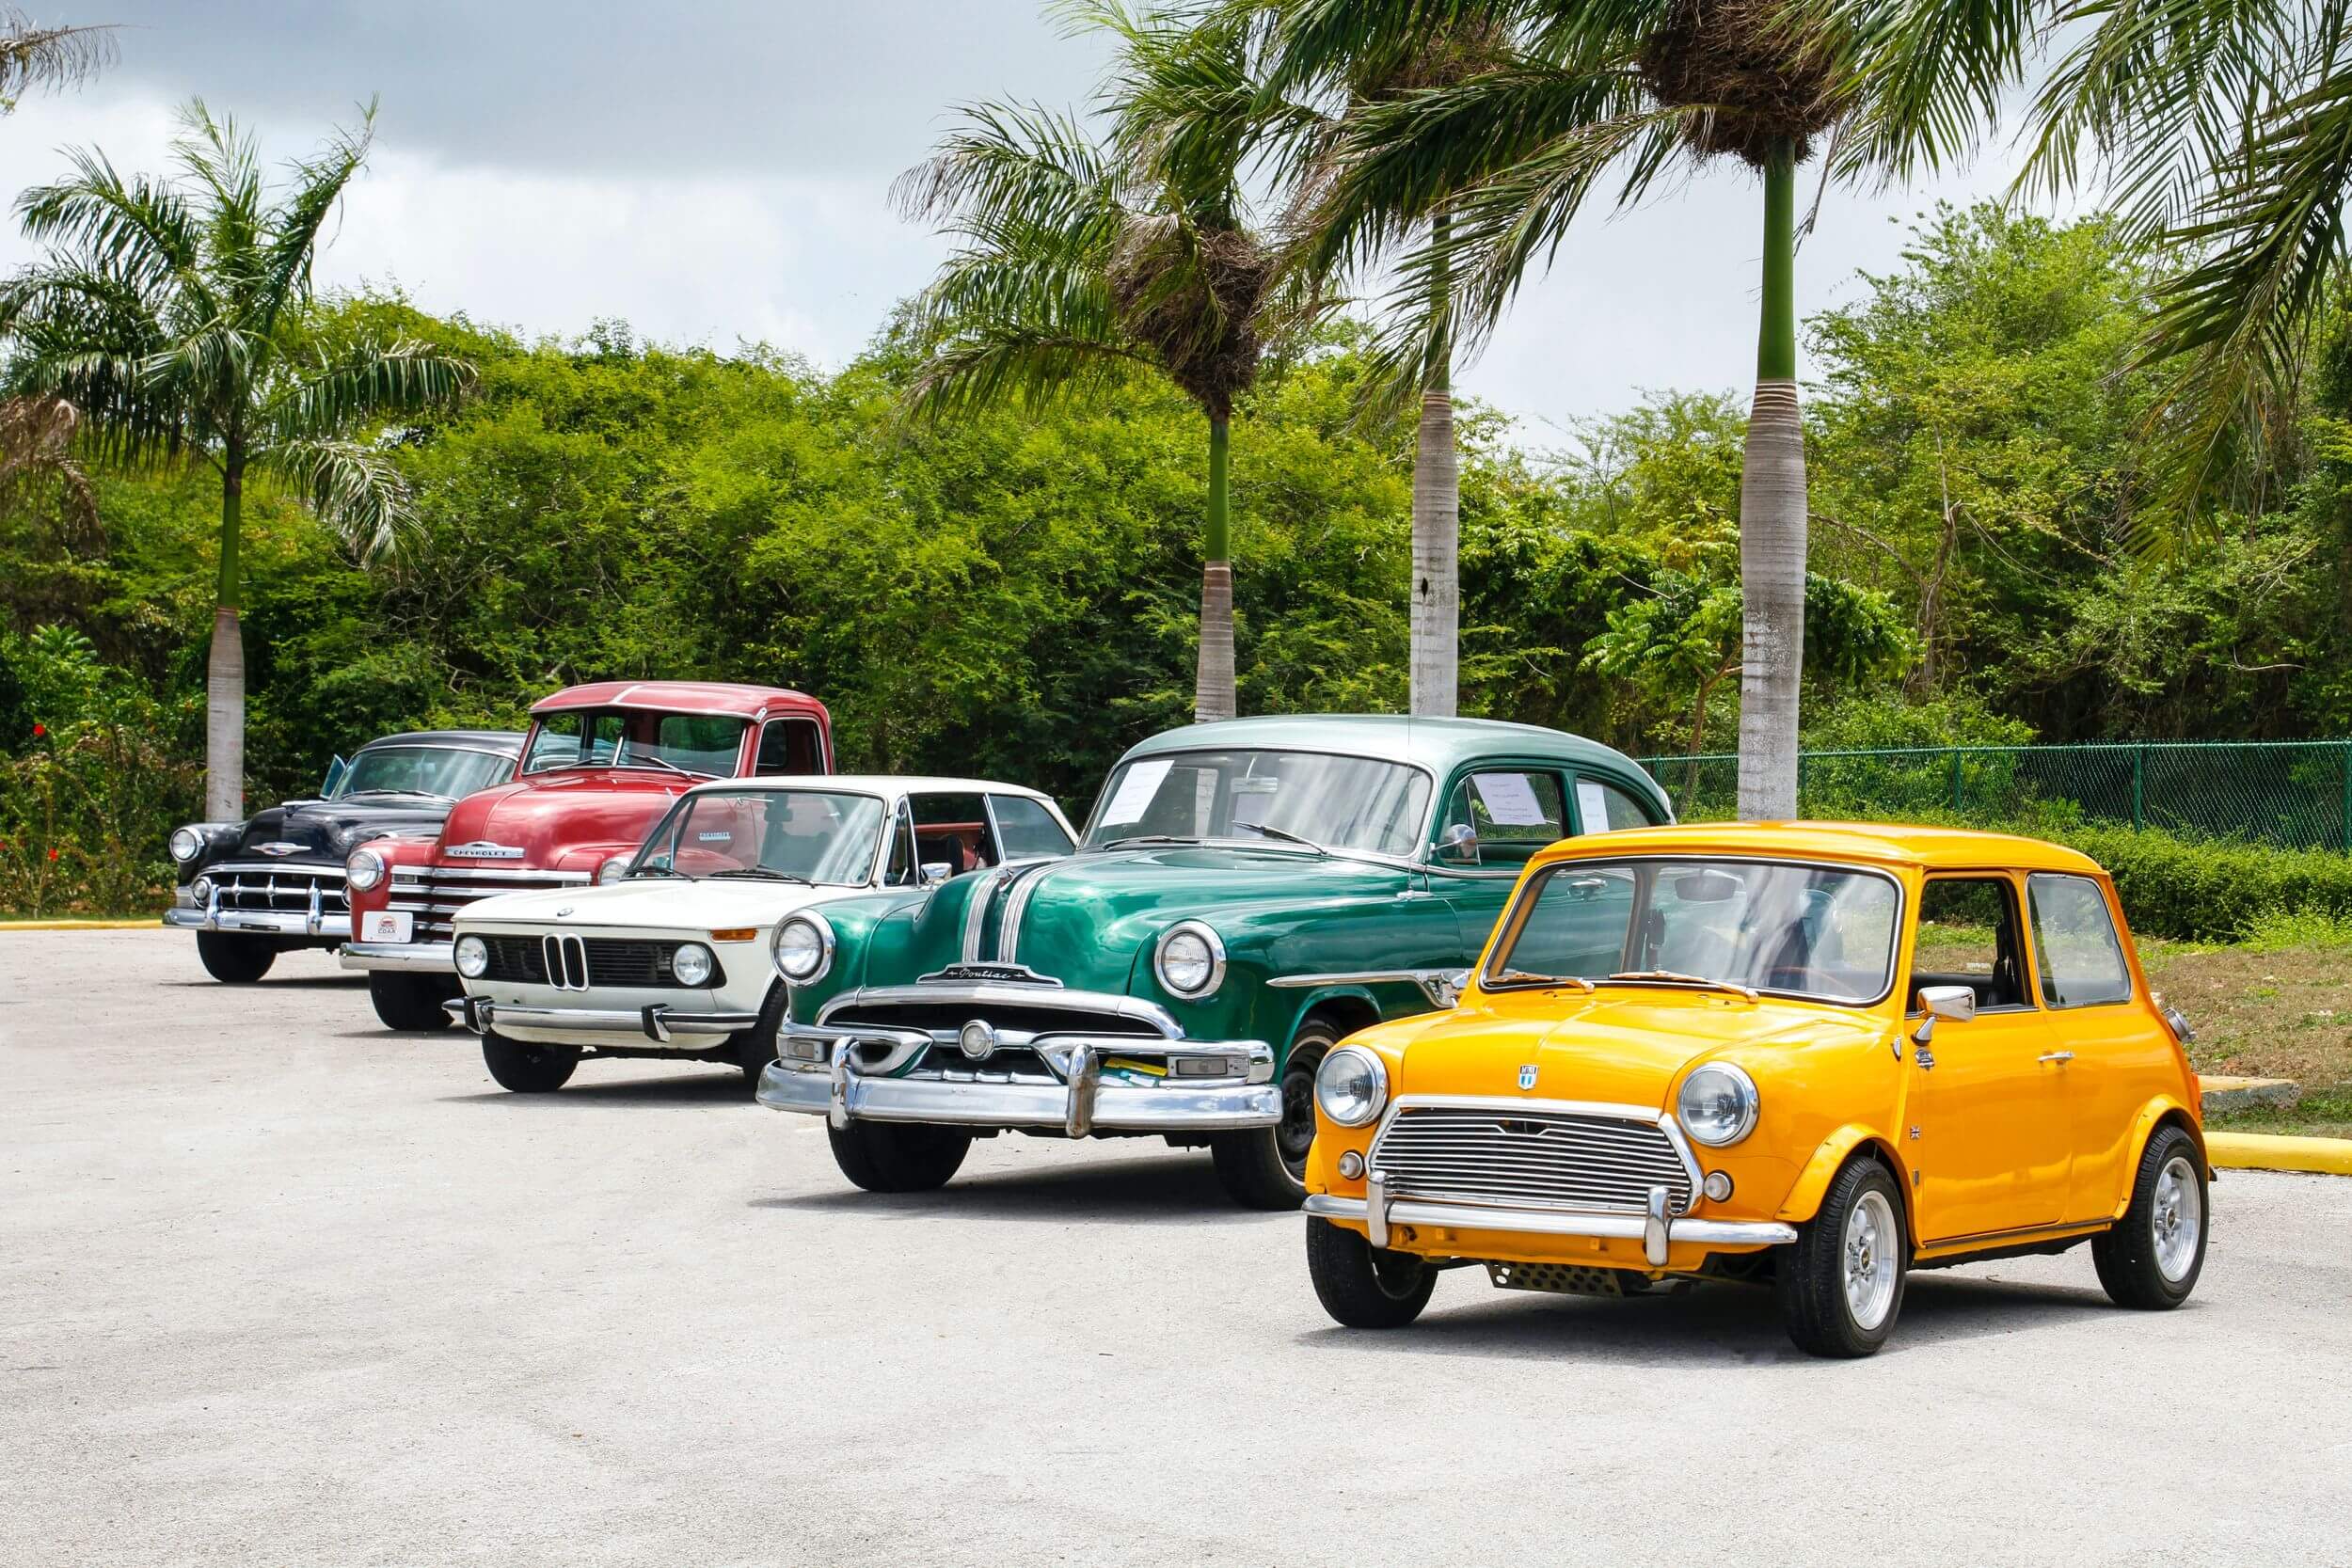 Four vintage cars lined up infront of palm trees.